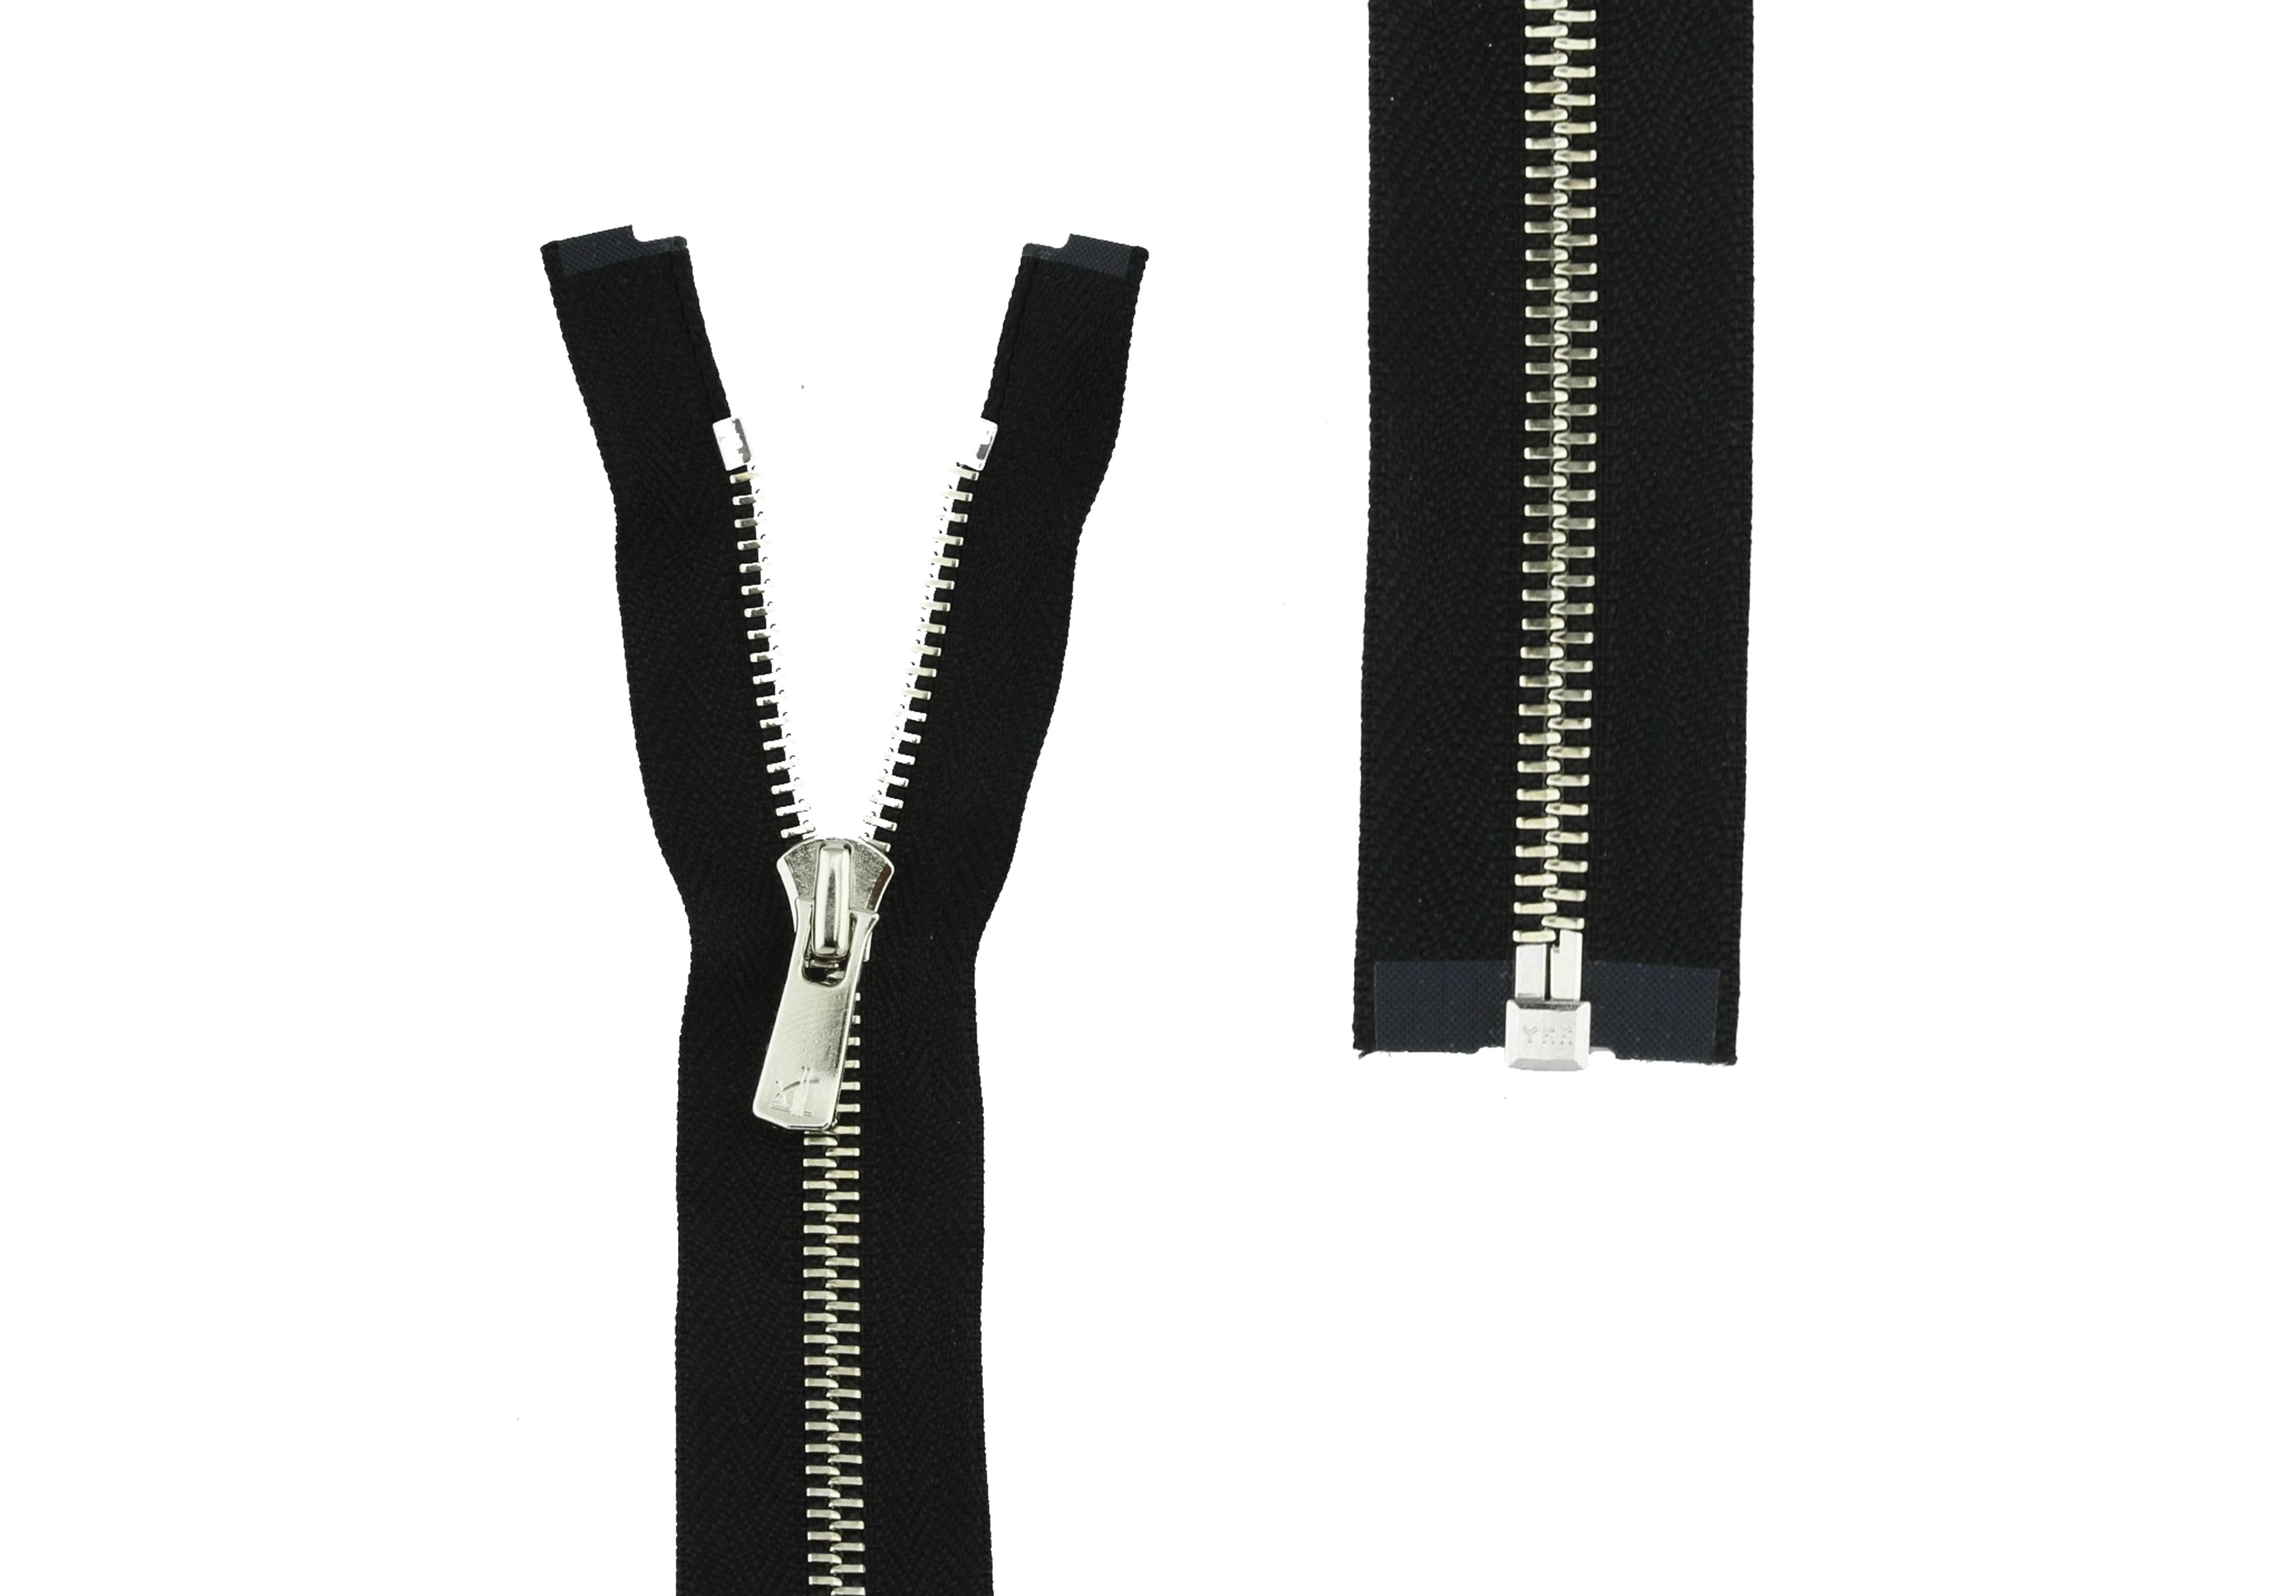 YKK Excella - Zipper Accessories (Made in Japan)